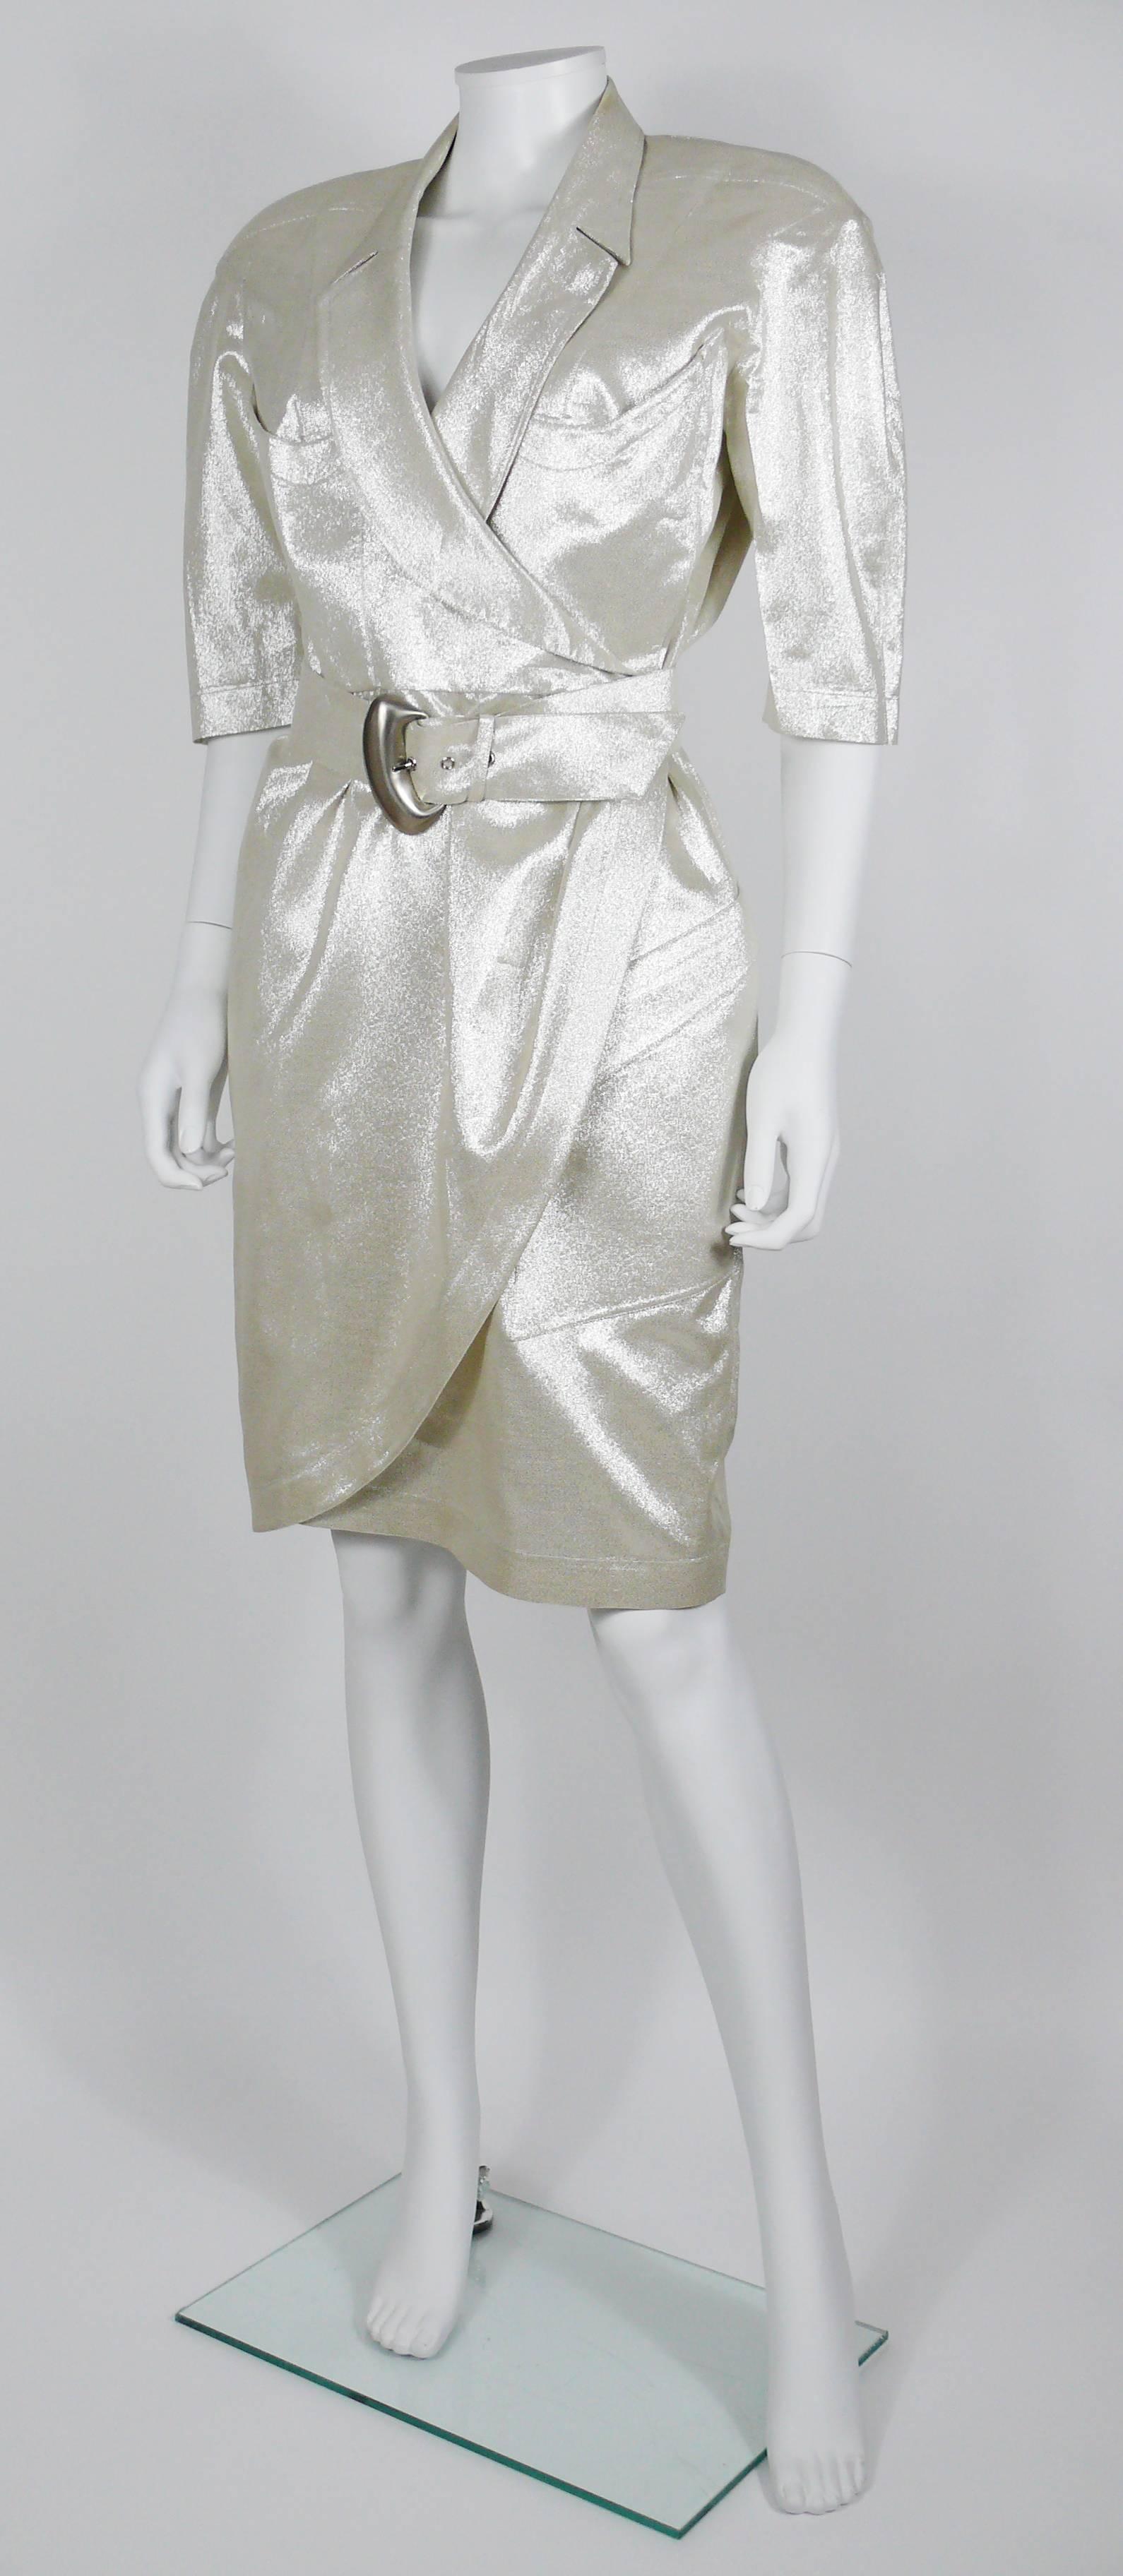 THIERRY MUGLER vintage gold lurex belted wrap dress.

Gorgeous MUGLER's cut.

Half length sleeves.
Unlined.
Shoulder pads (stitched - but can be removed).
Two pockets at the front top.
One asymetric pocket at the front lower.

Label reads THIERRY